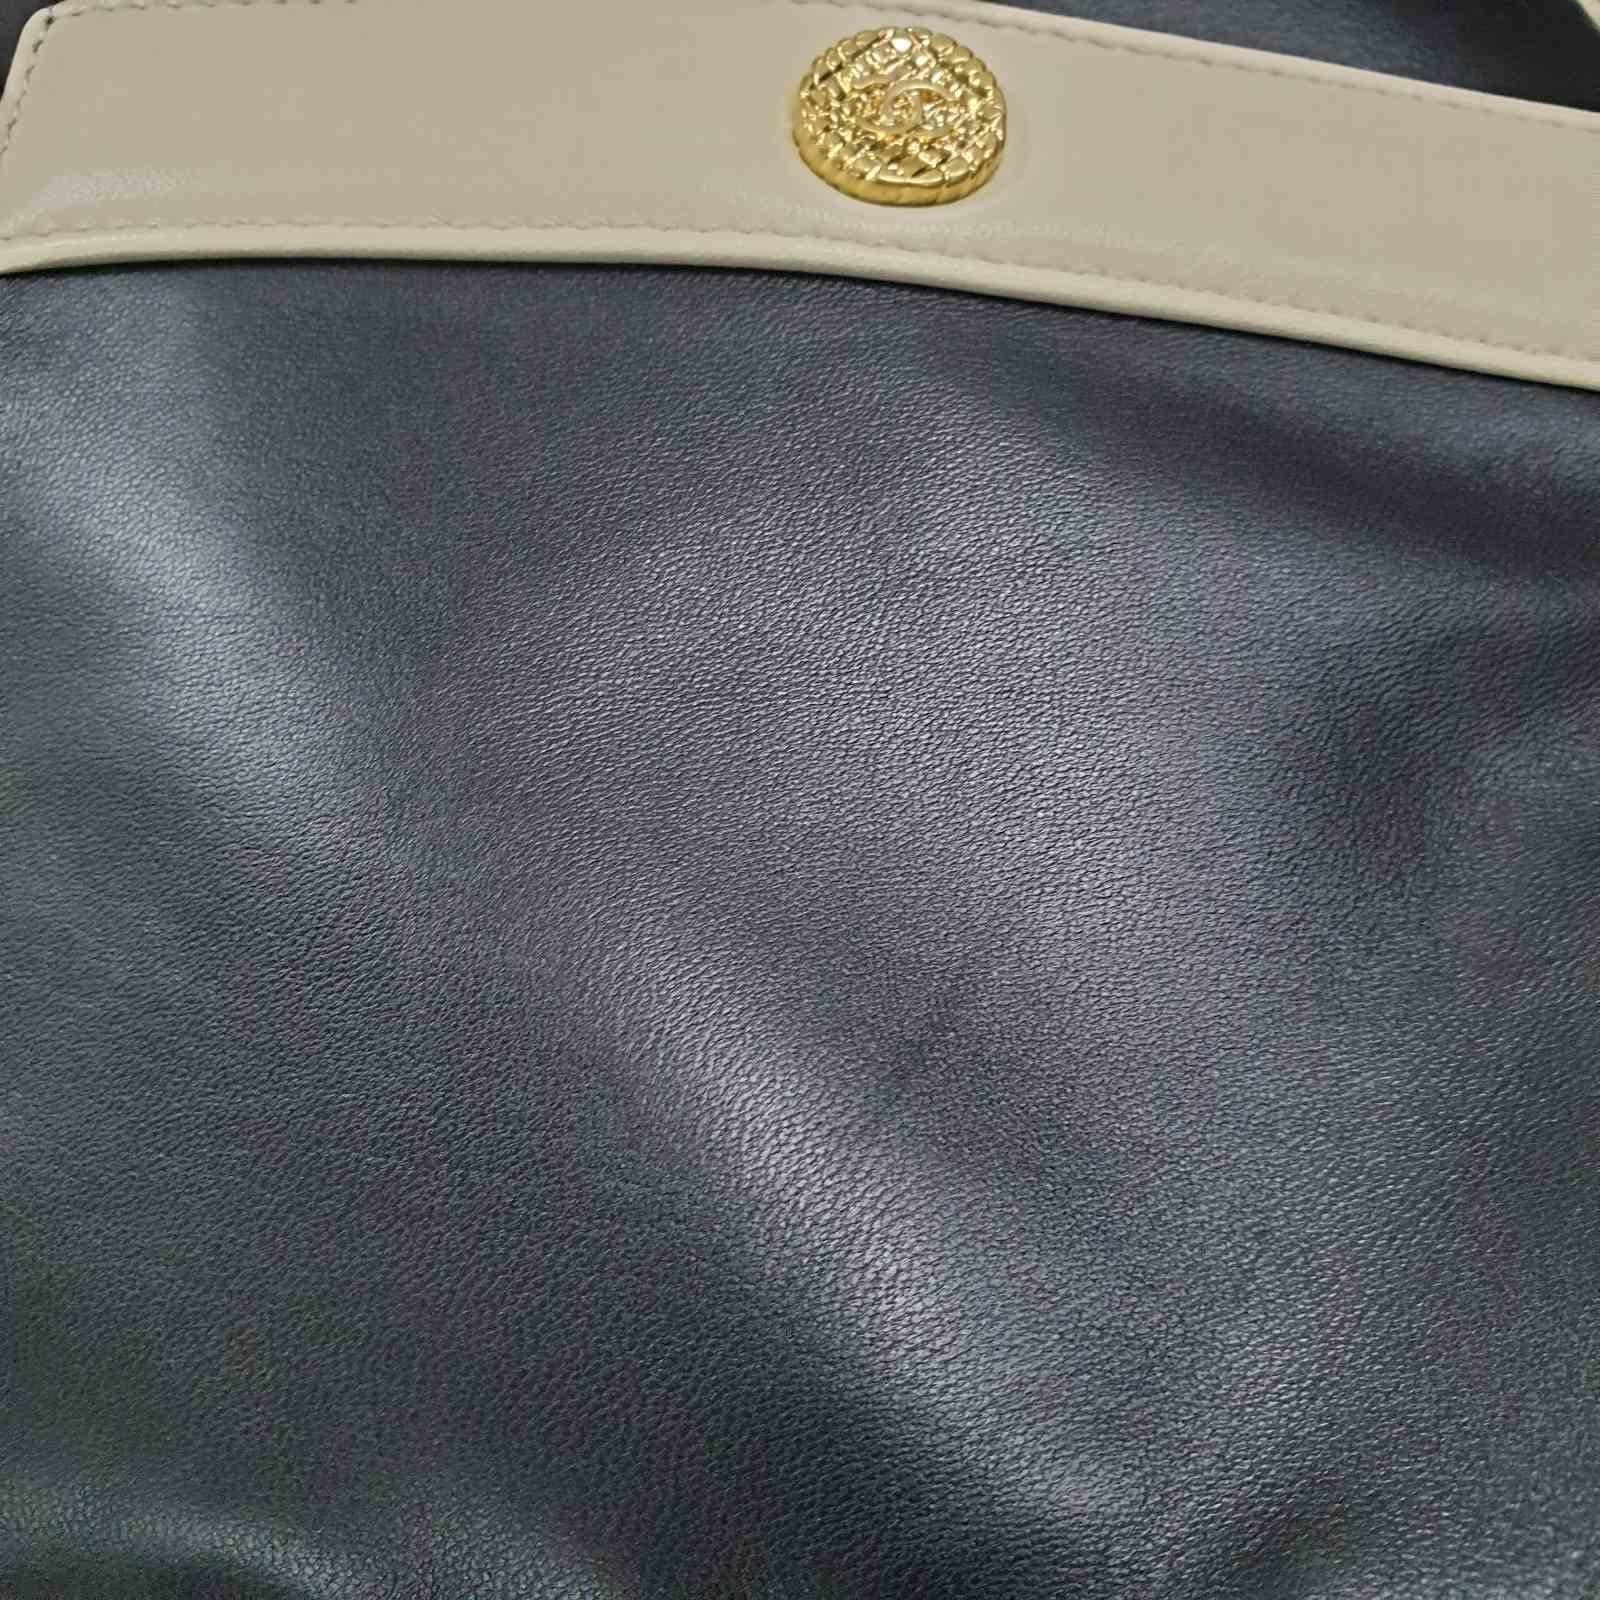 Chanel Large Girl Leather Bag For Sale 6